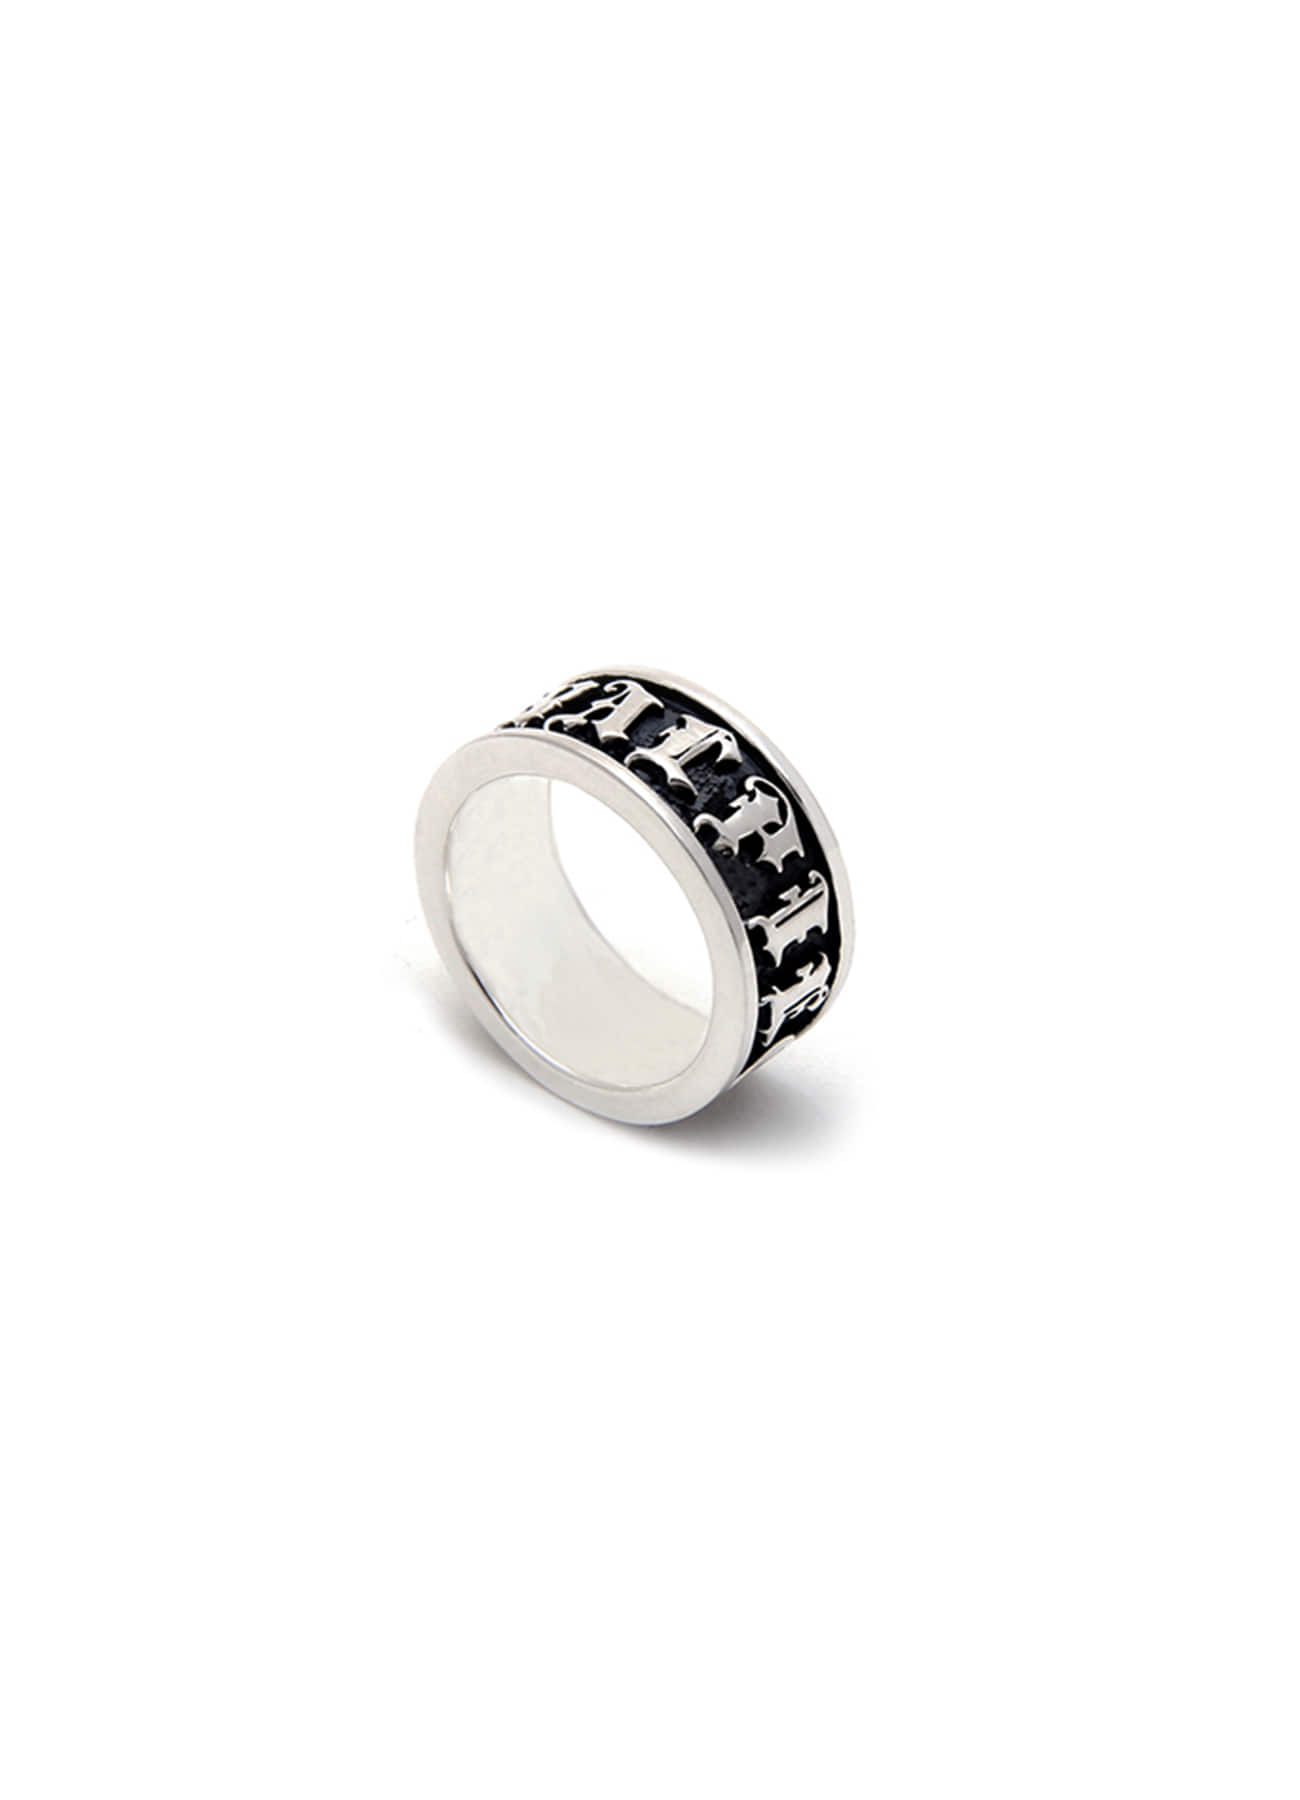 ROYAL LETTERING SILVER RING